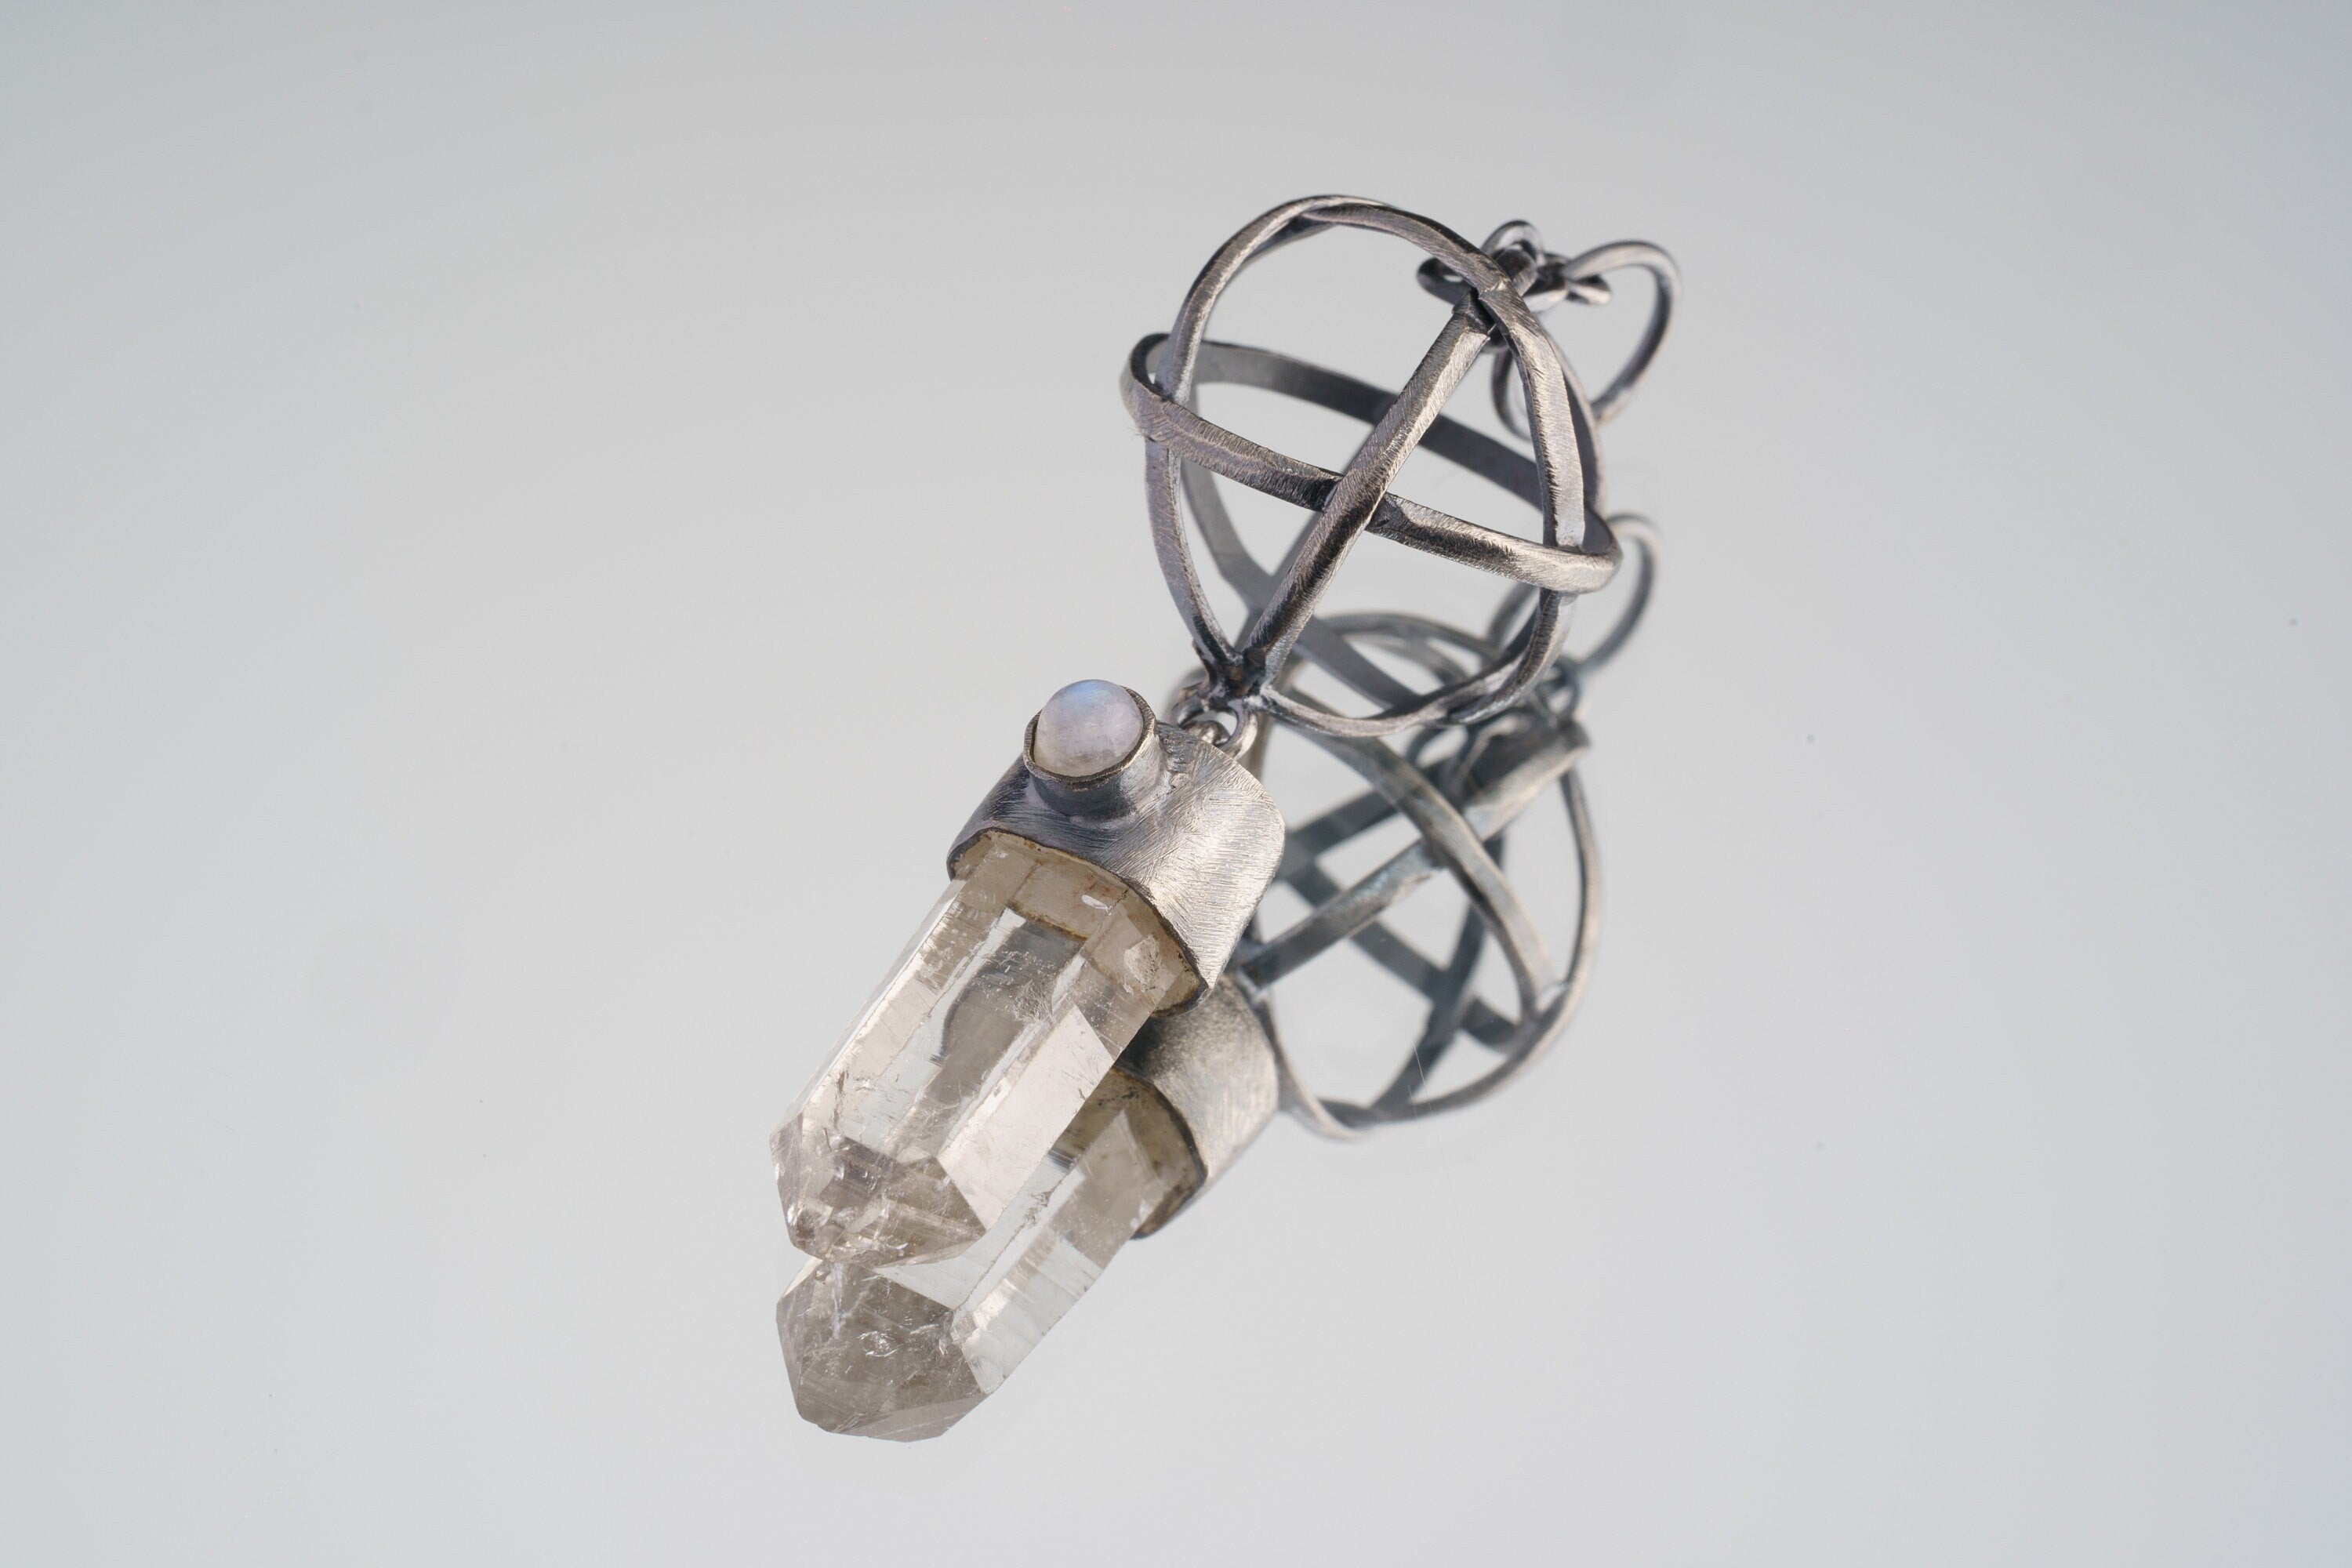 Celestial Harmony: Himalayan Lemurian Quartz Point & Oval Blue Moonstone - Oxidised and Brush Textured - Sterling Silver Pendant